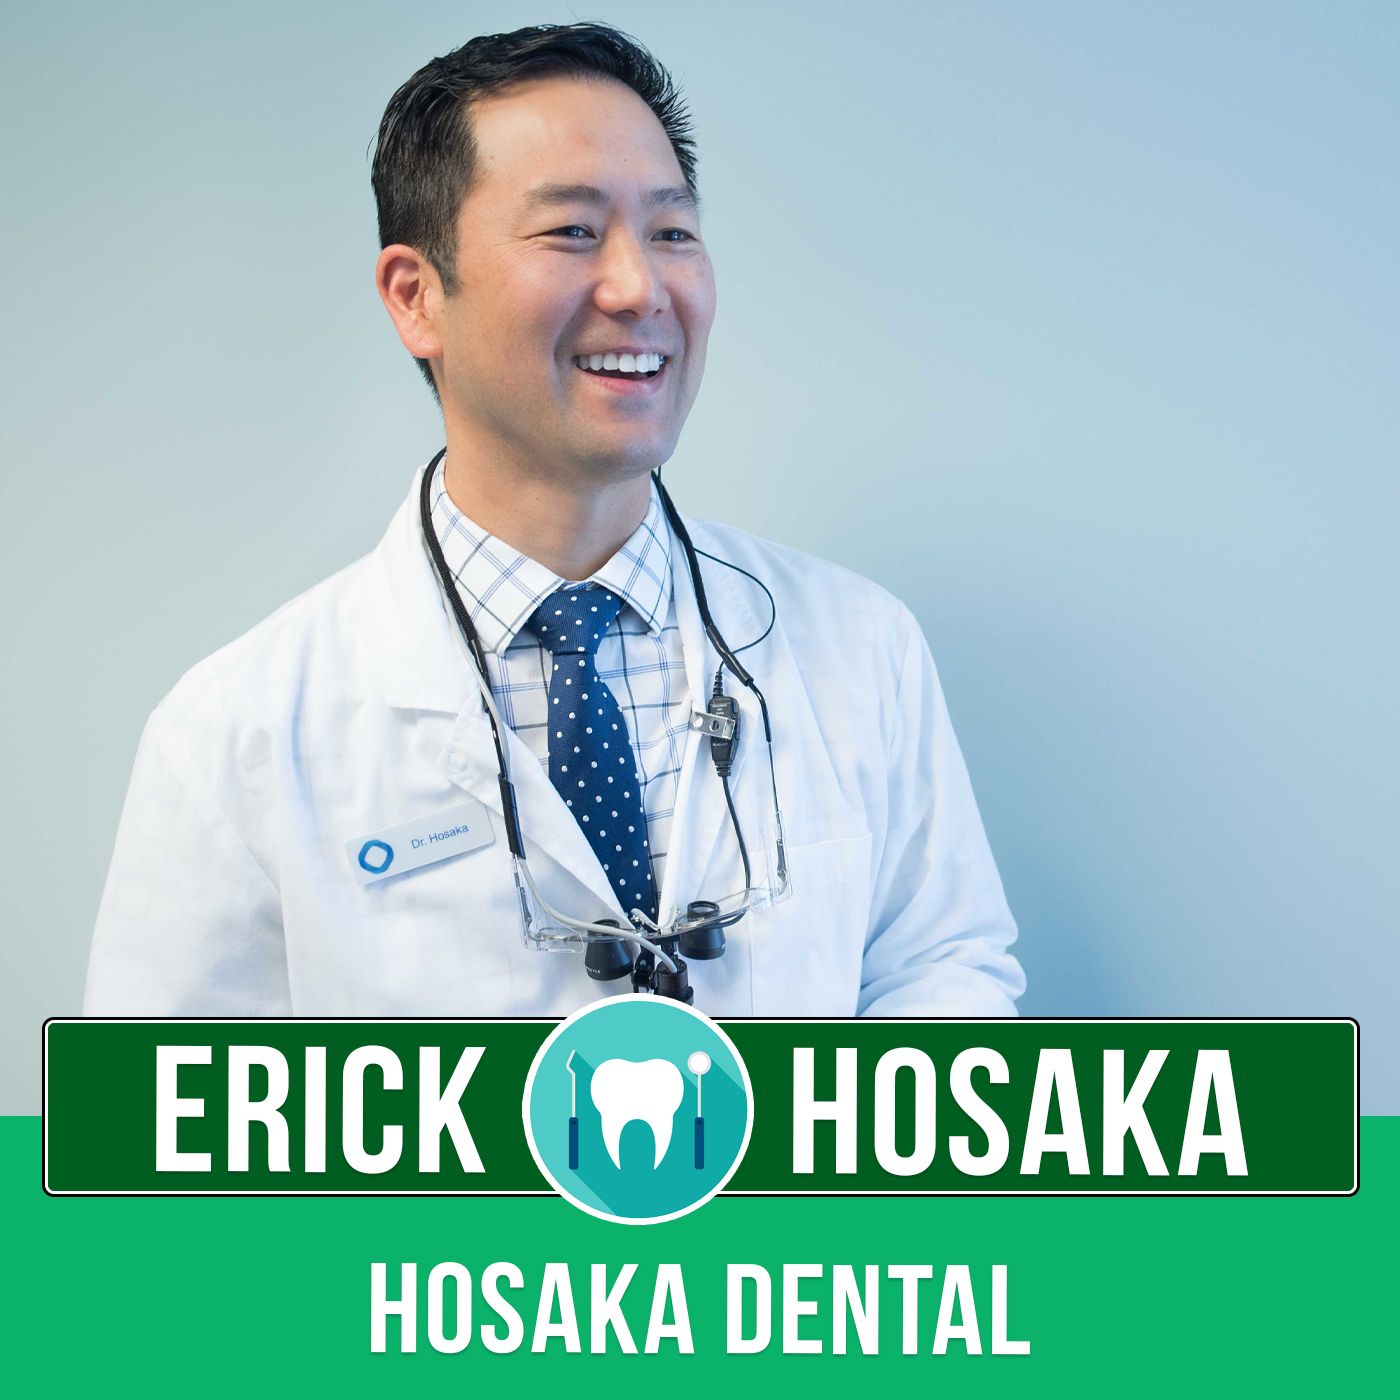 Dr. Erik Hosaka - 5 Tips on How to Avoid Paying Thousands on Dental Care for You and Your Family